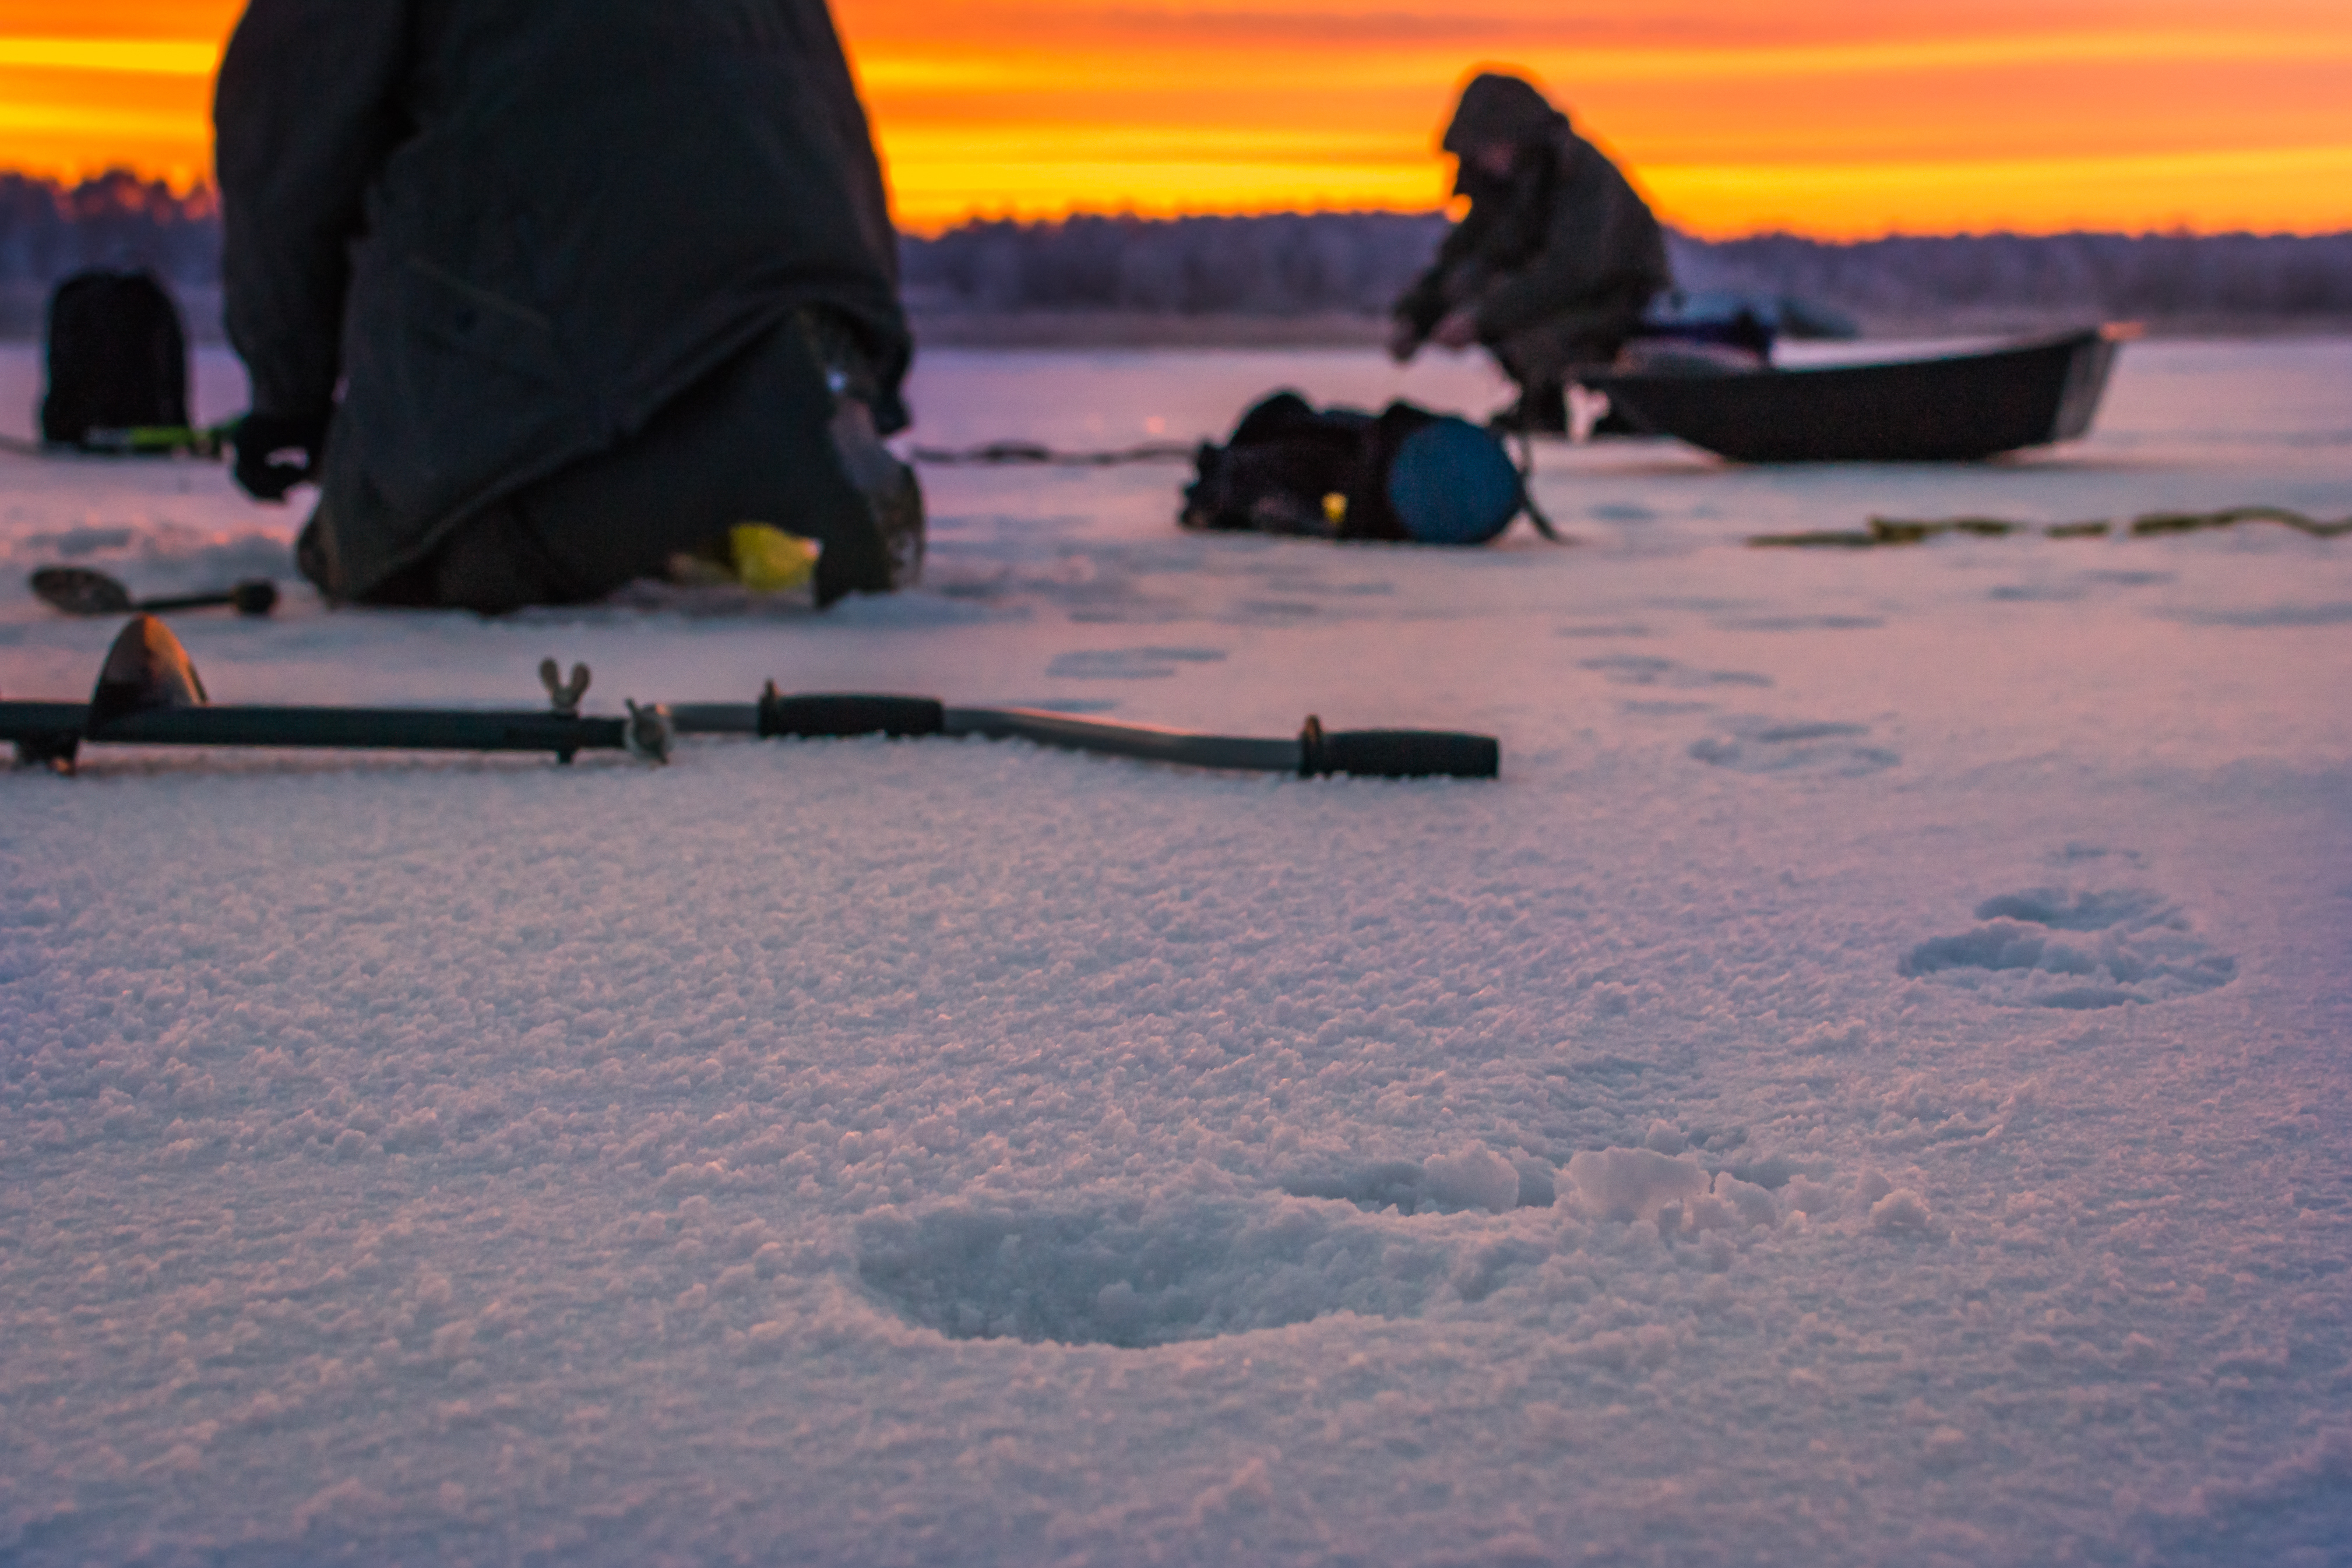 Ice Fishing Safety: 10 Tips and Gear List - Humminbird